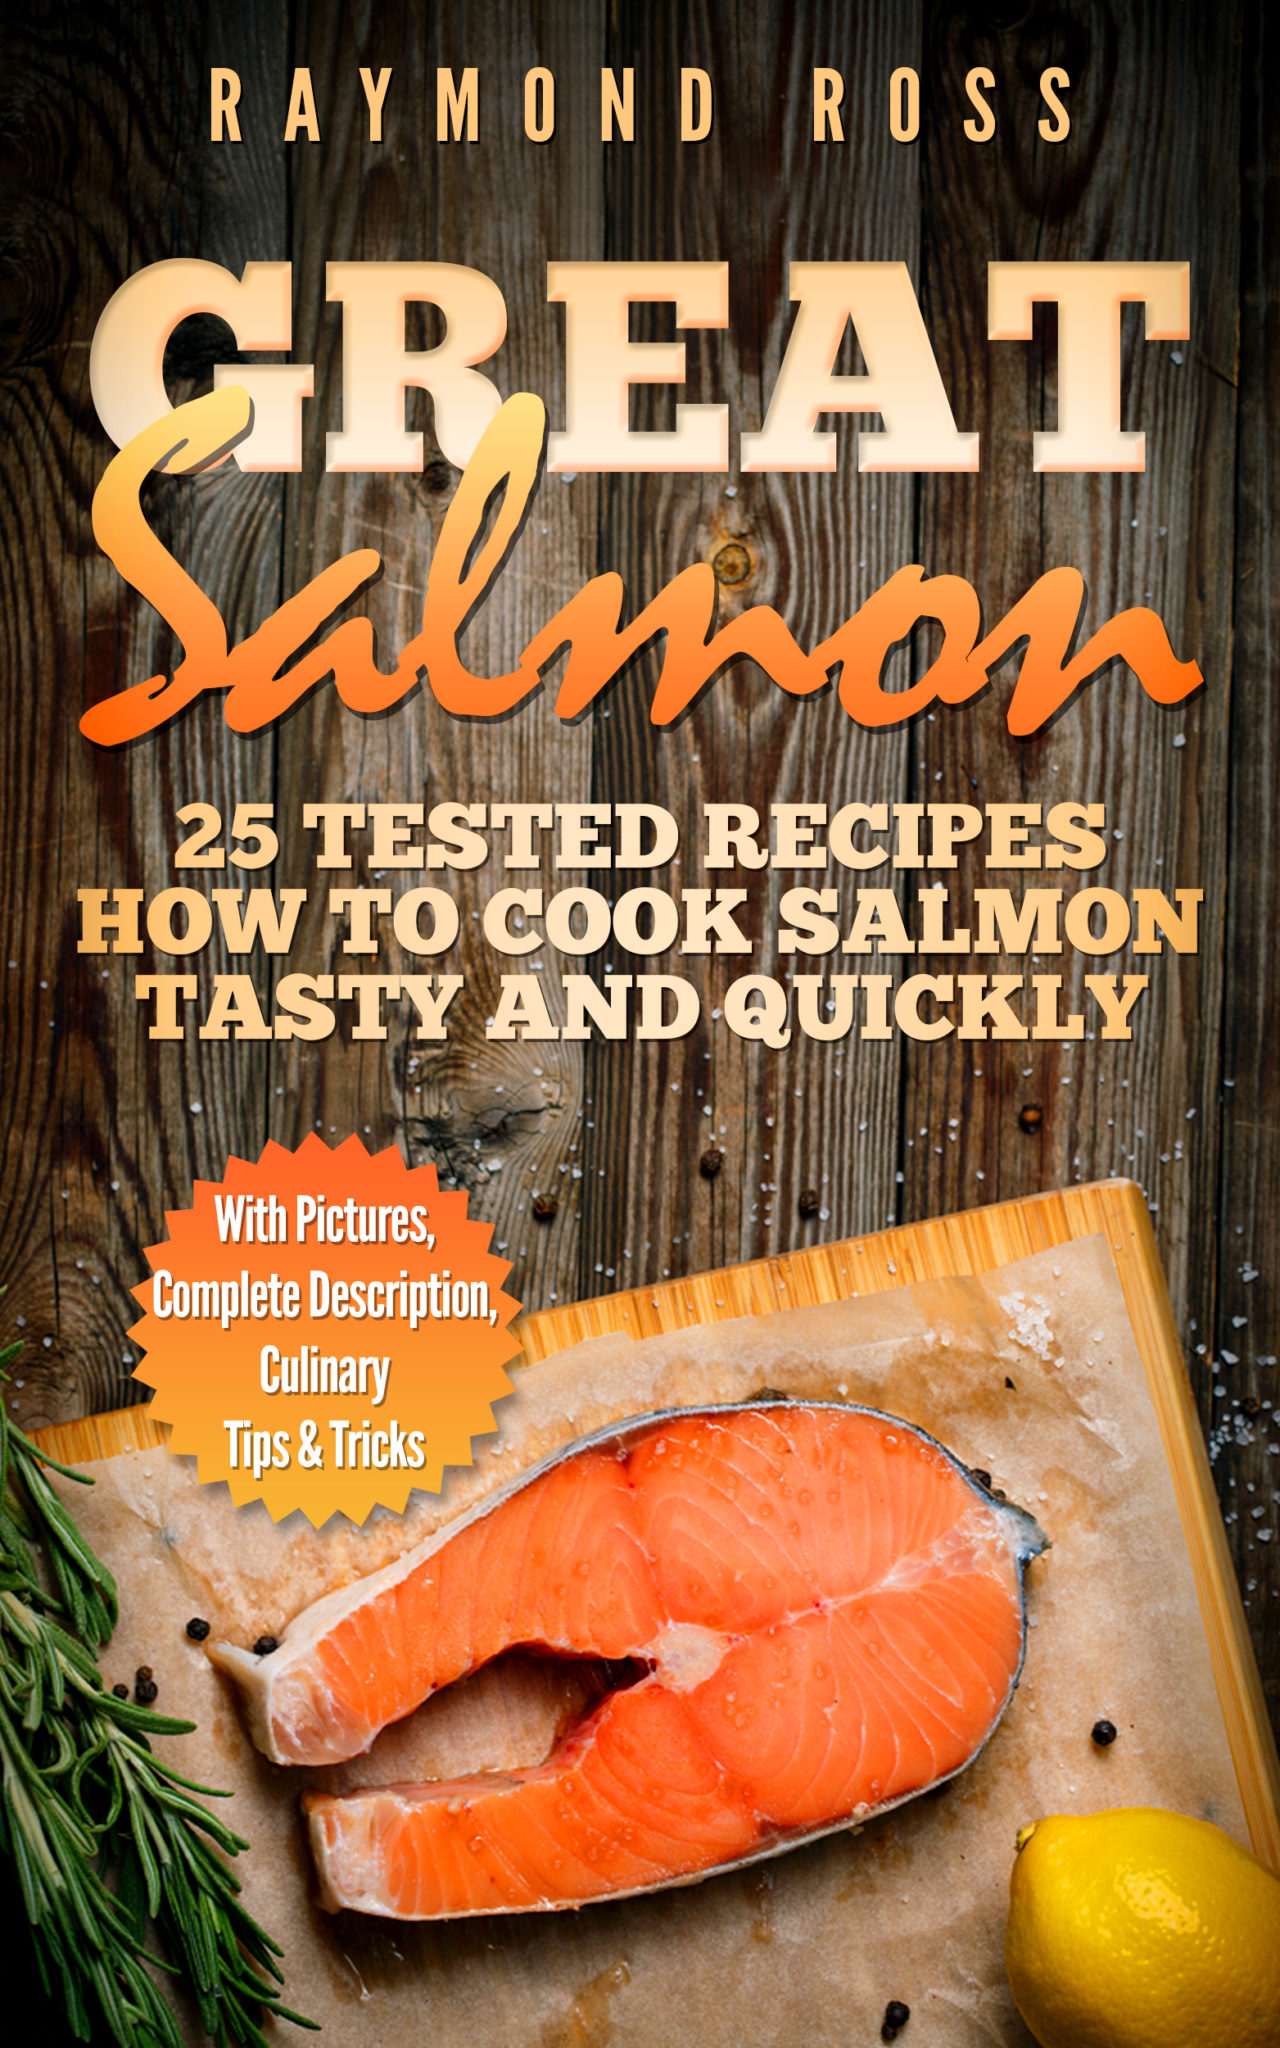 FREE: Great Salmon: 25 tested recipes how to cook salmon tasty and quickly by Raymond Ross